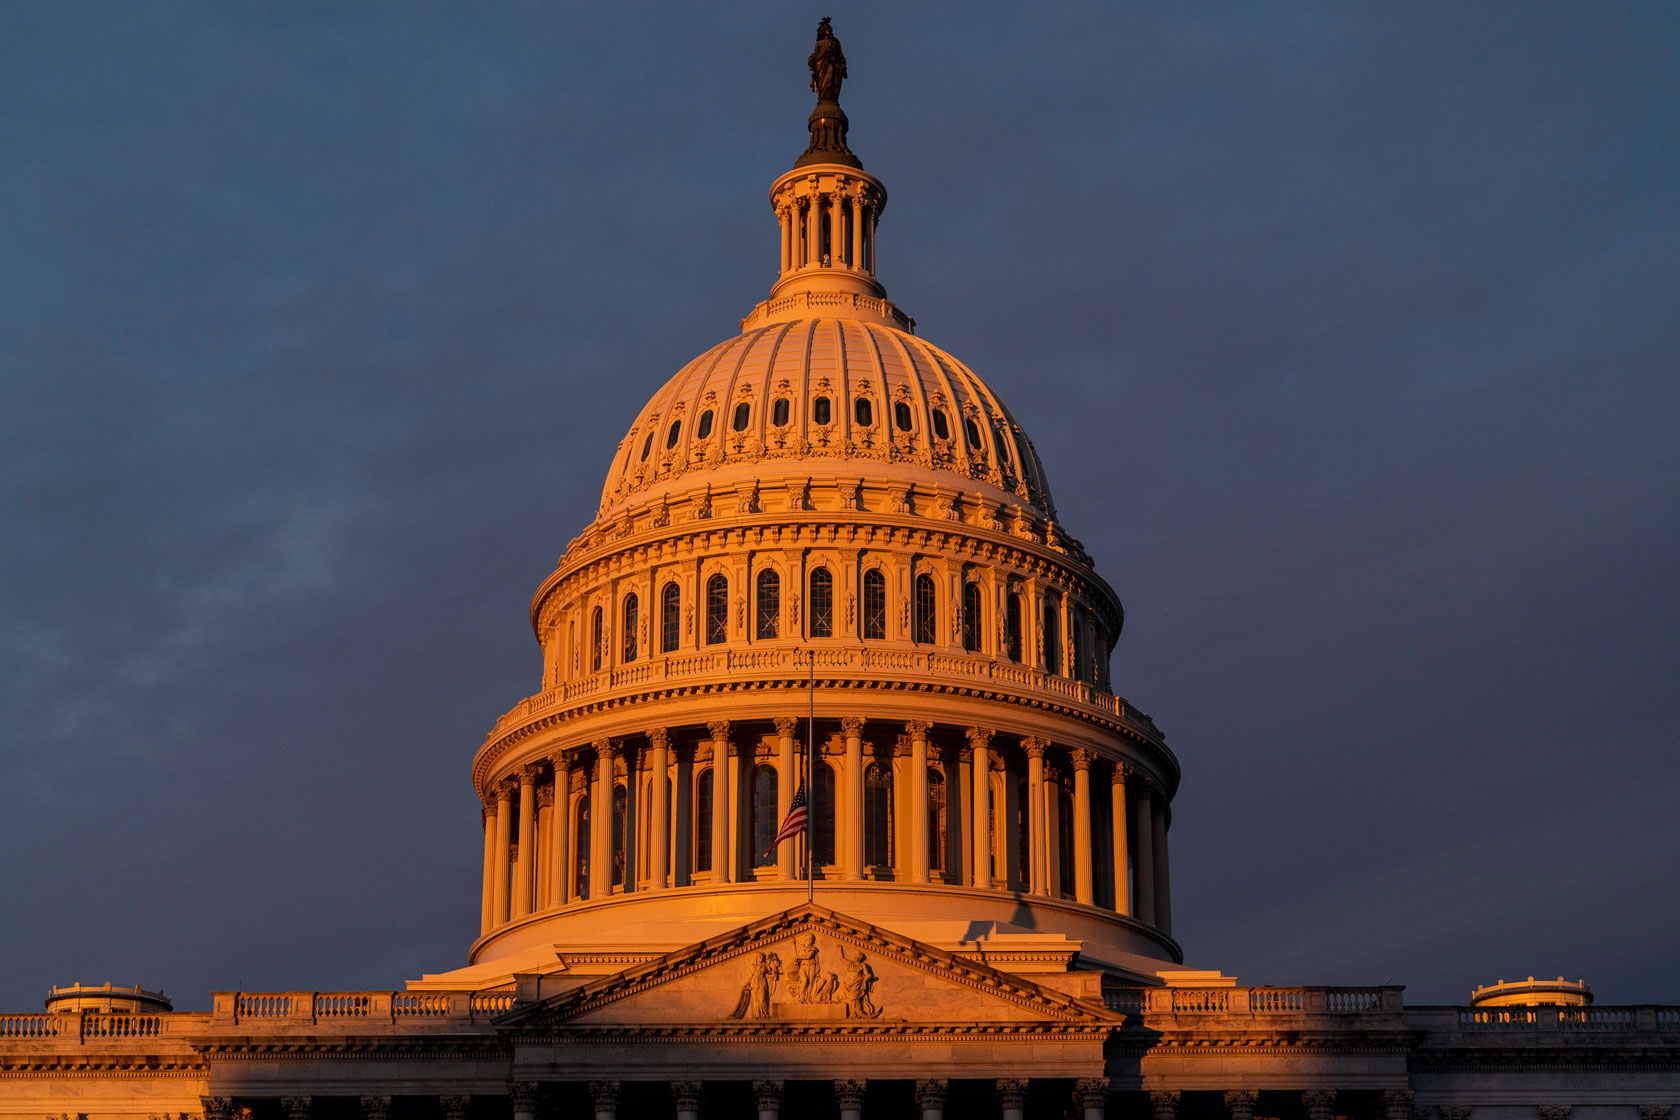 The dome of the U.S. Capitol Building is illuminated by the rising sun on Capitol Hill.